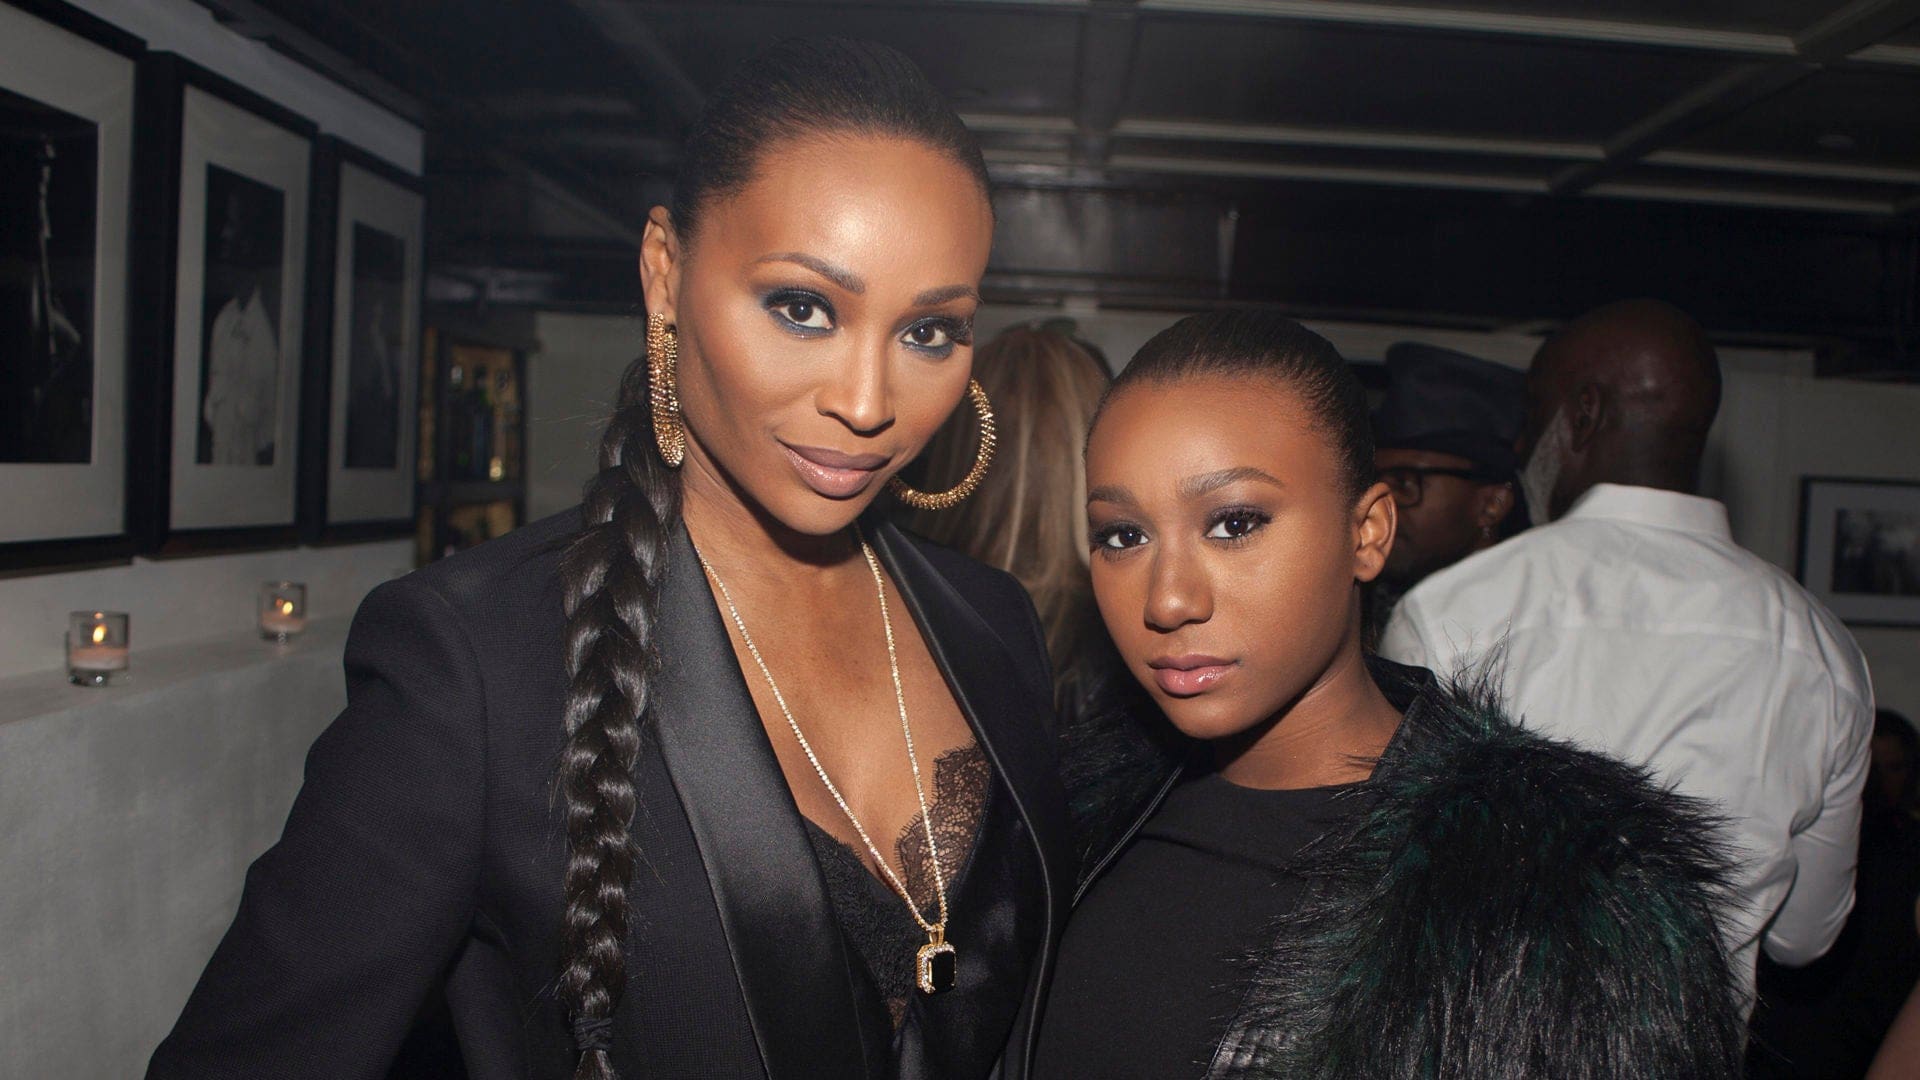 Cynthia Bailey's Daughter, Noelle Robinson Tells Her Mom She's Proud Of Her And Makes Her Day